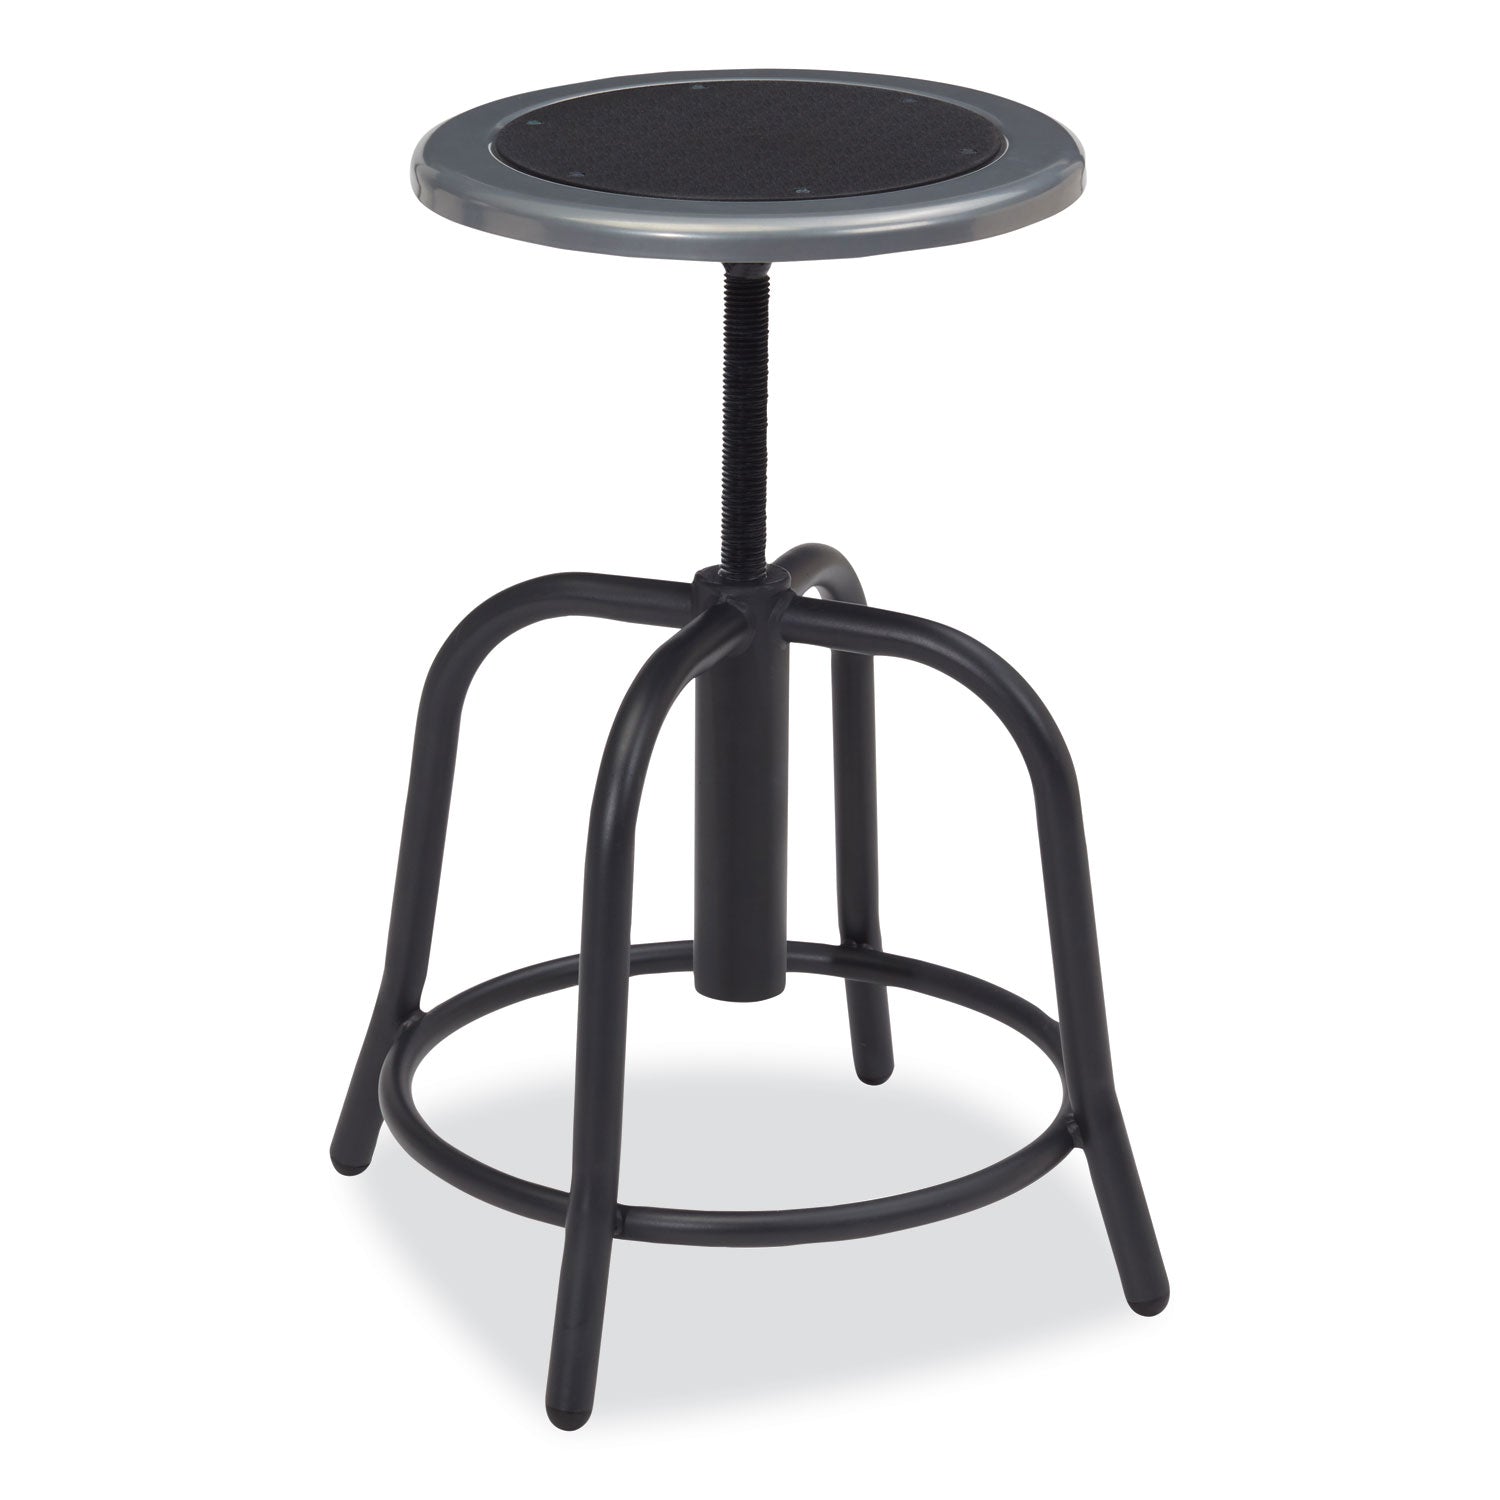 6800-series-height-adjustable-metal-seat-swivel-stool-supports-300lb-18-24-seat-ht-black-seat-baseships-in-1-3-bus-days_nps681010 - 2